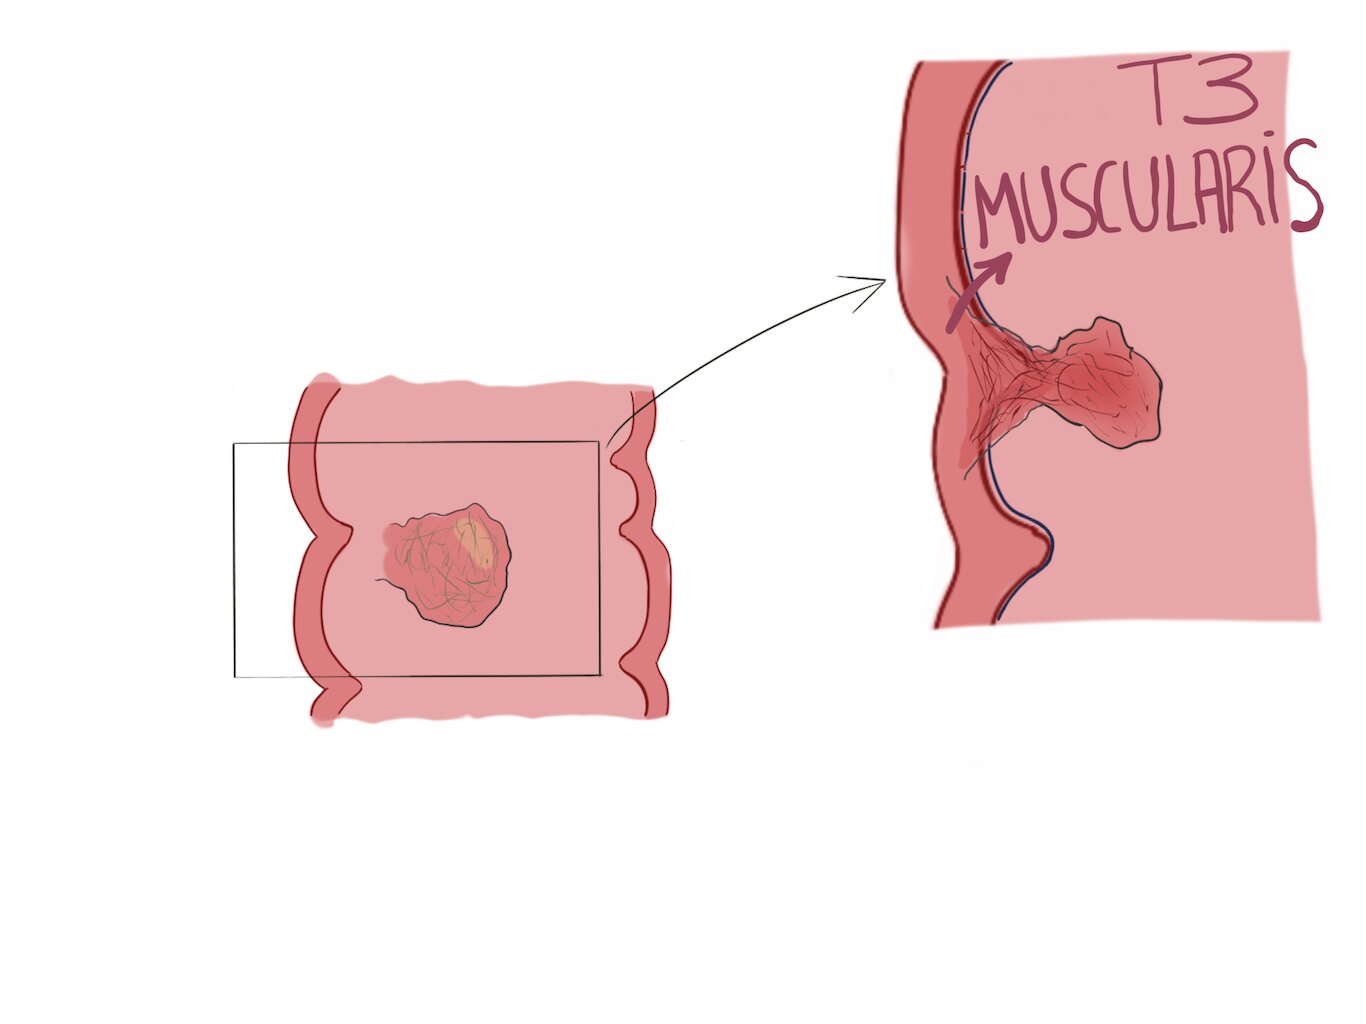 Colon cancer infiltrating the muscularis layer (T3 staging)